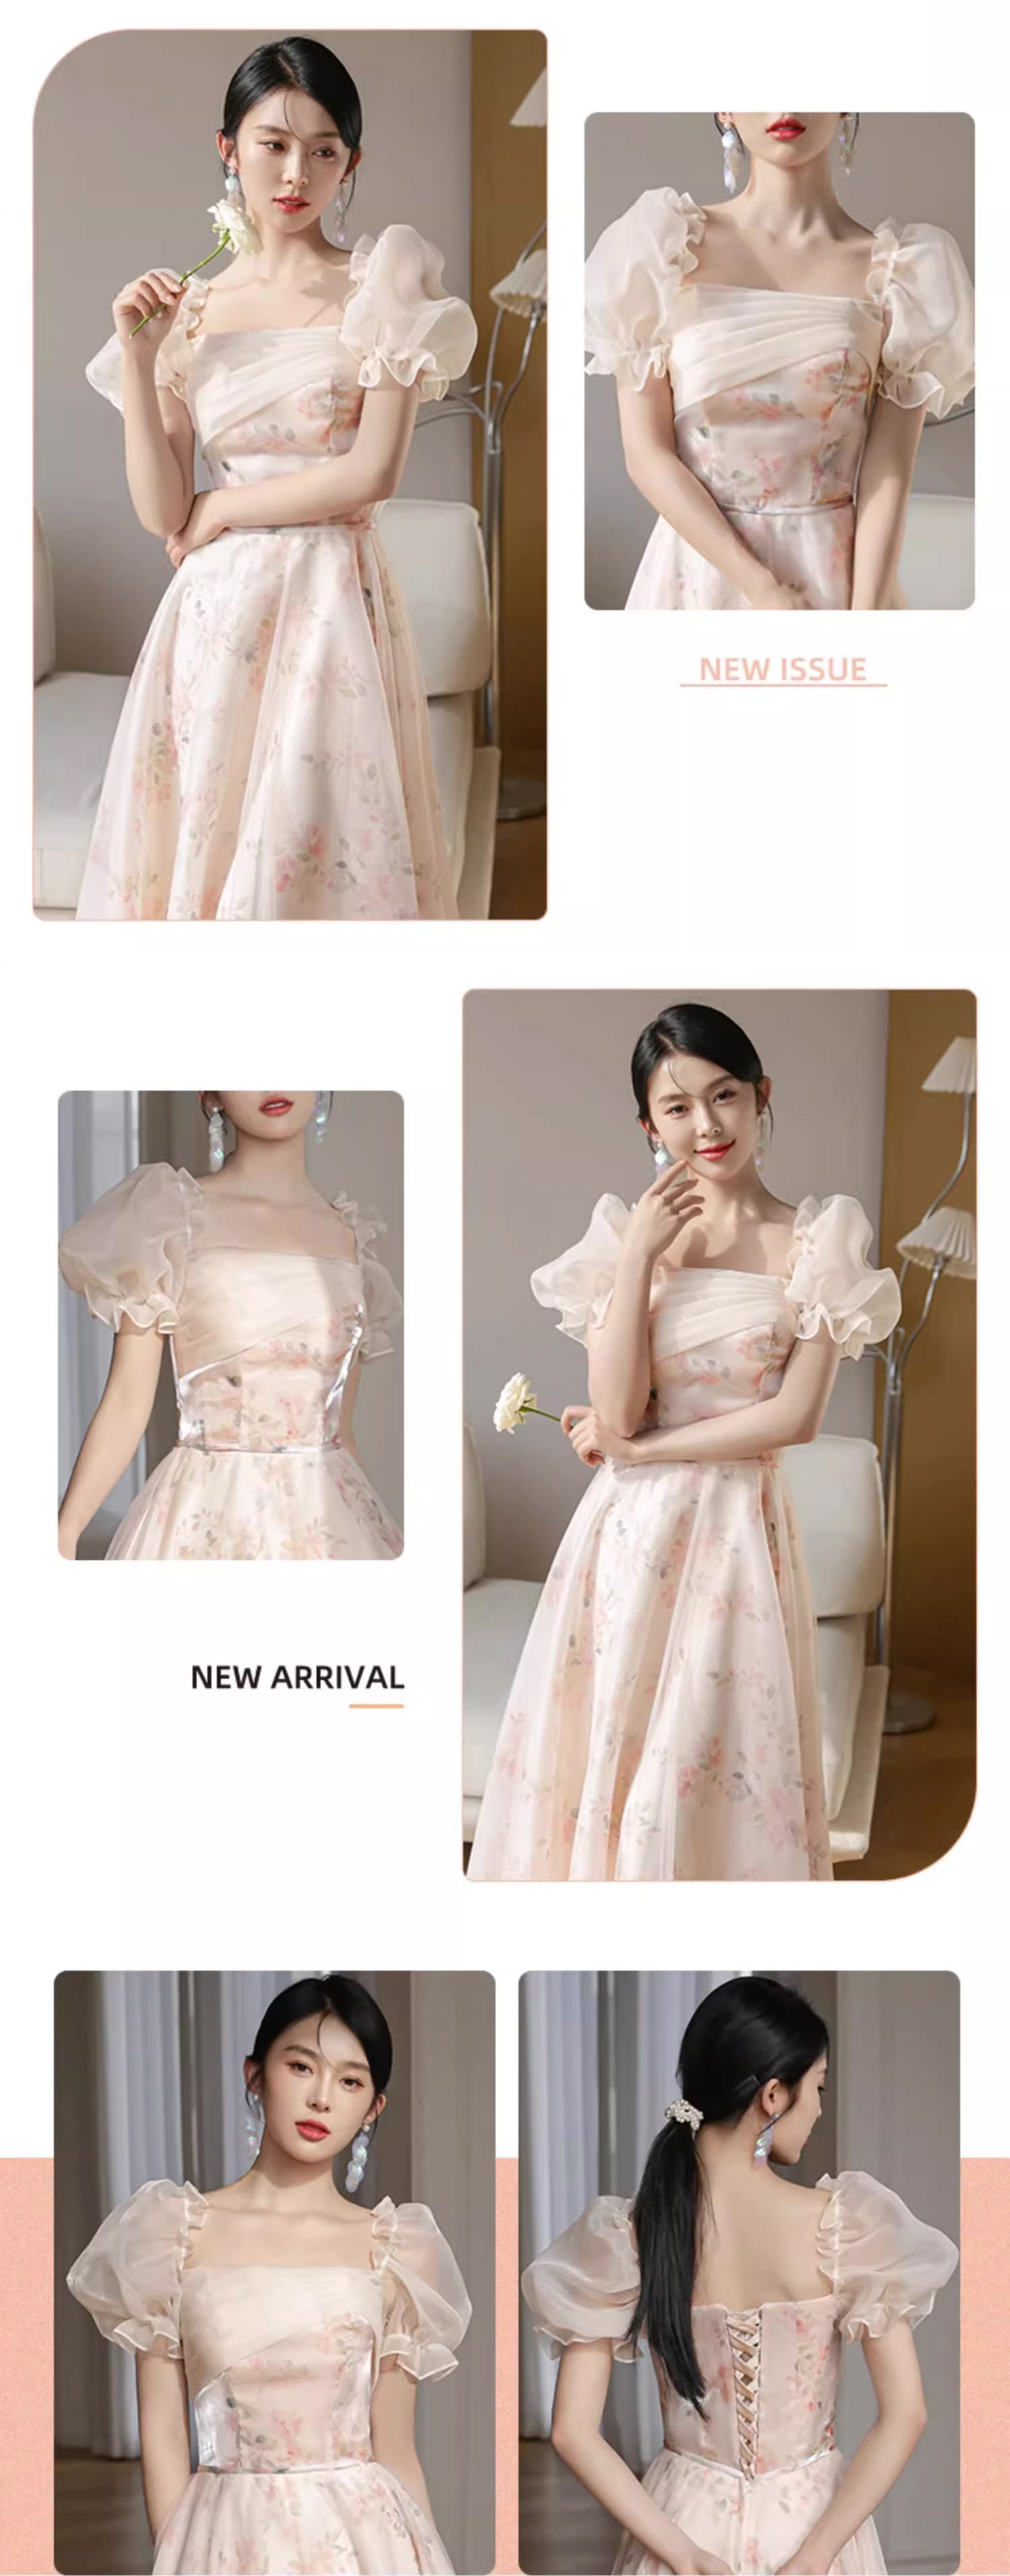 Sweet-A-line-Chiffon-Pink-Floral-Tulle-Maxi-Cocktail-Bridesmaid-Dress14